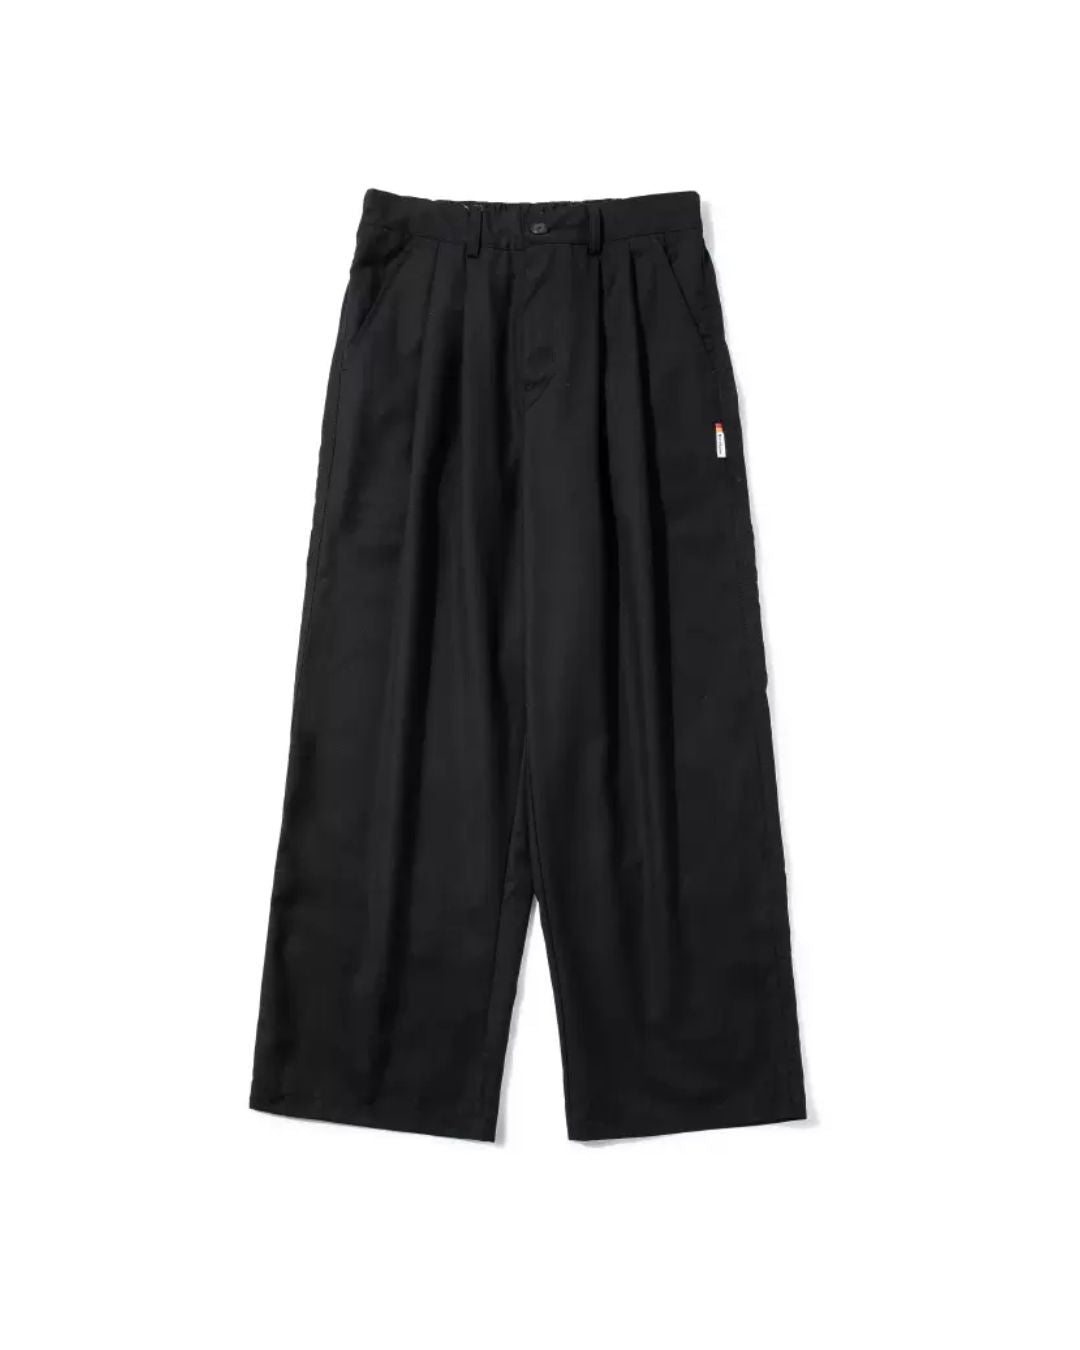 Relaxing Straight Summer Pants　WP067